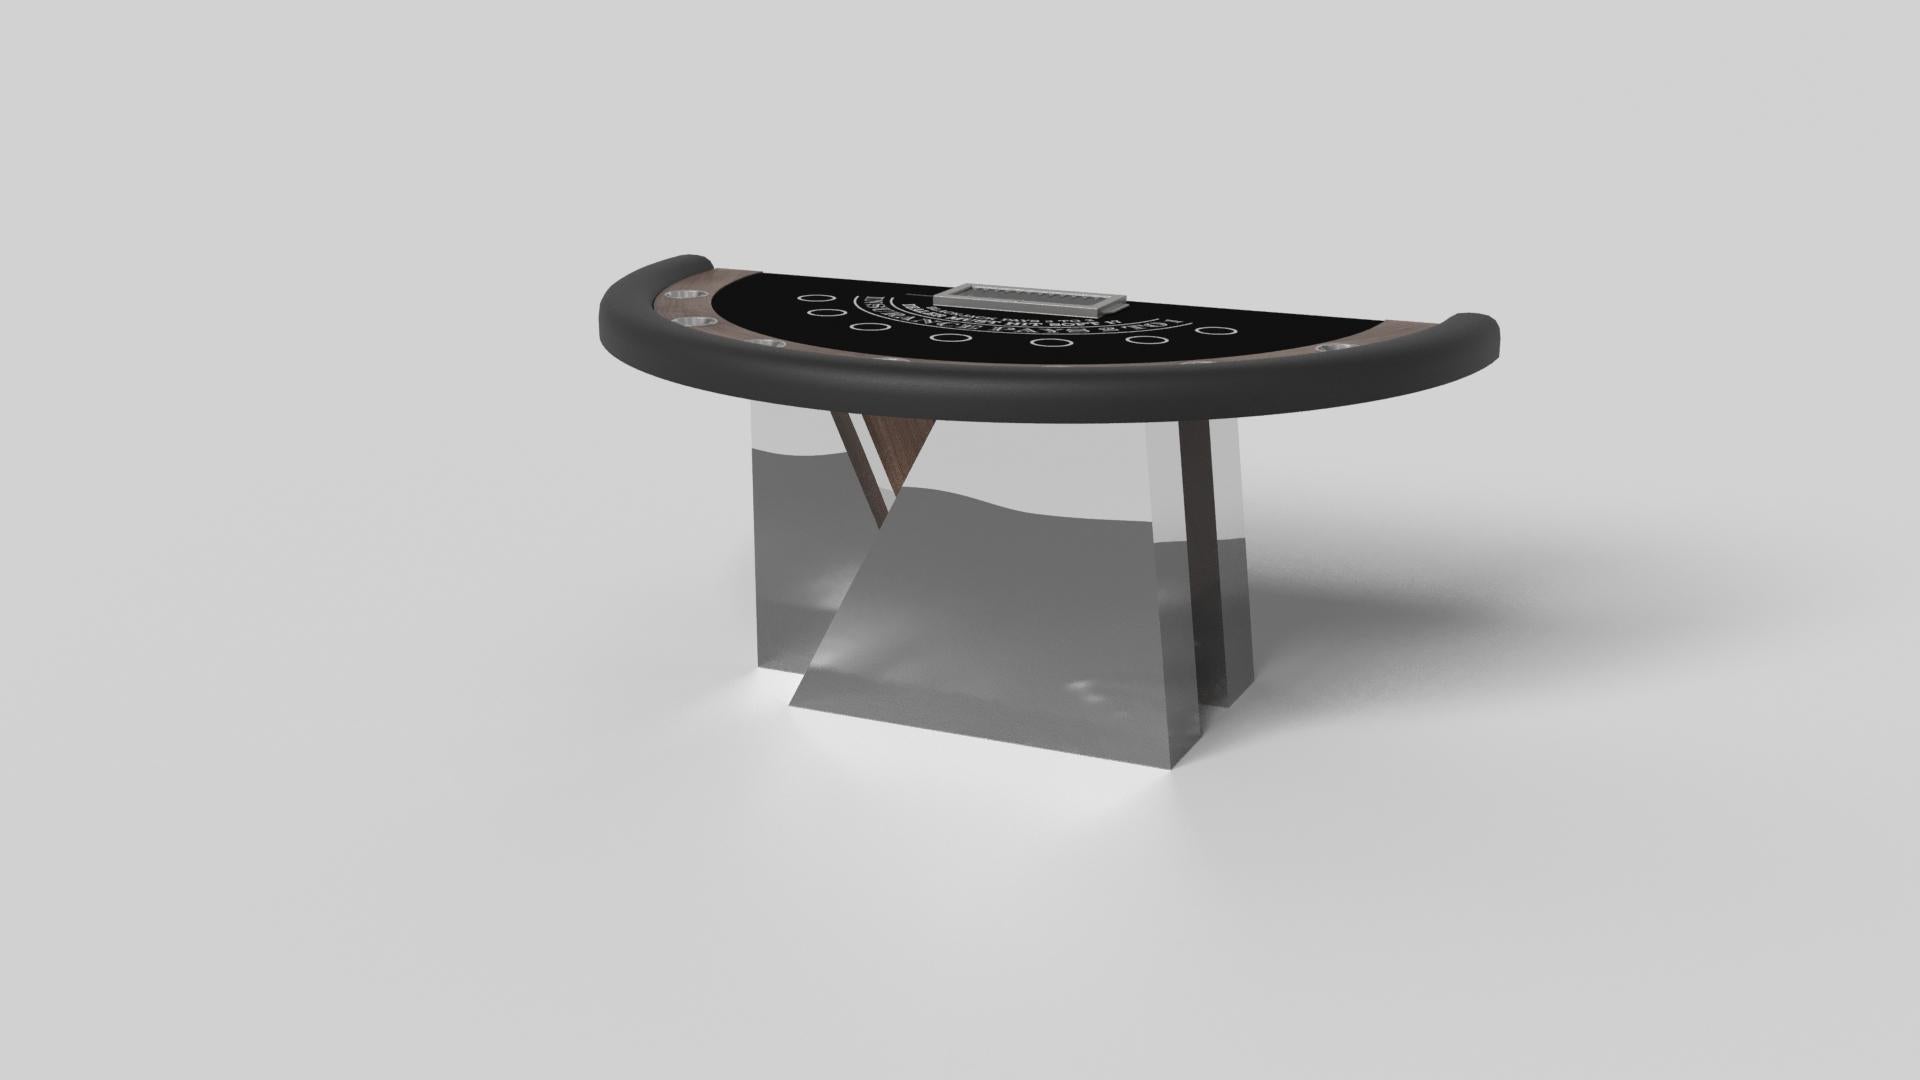 An asymmetric base creates a free-floating silhouette, making the Stilt blackjack table in walnut a compelling, contemporary addition to the modern home. Detailed with a chip rack and betting circles, this luxury handcrafted game table boasts an